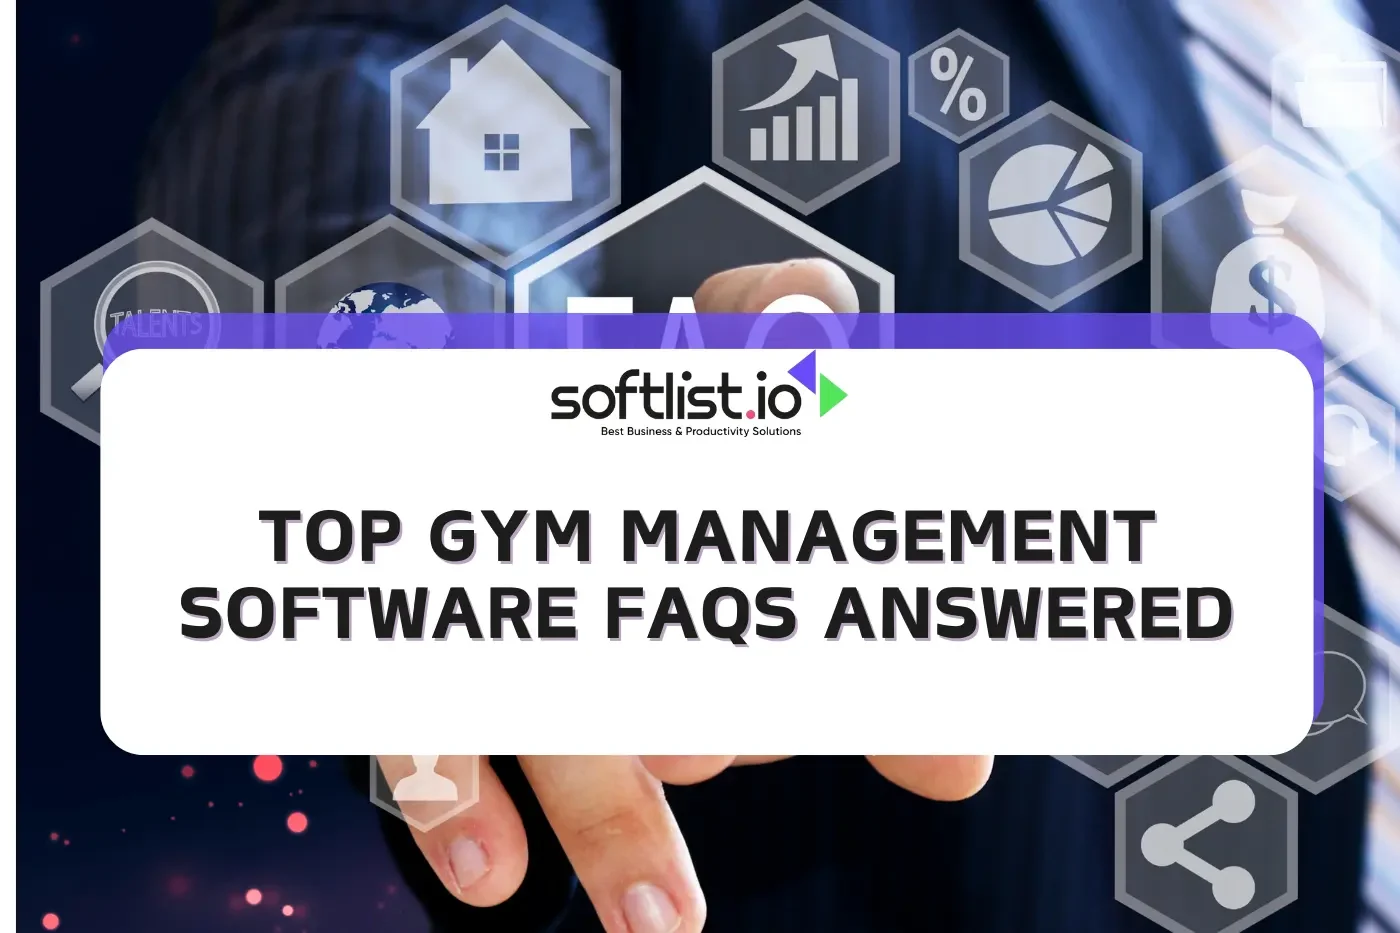 Top Gym Management Software FAQs Answered